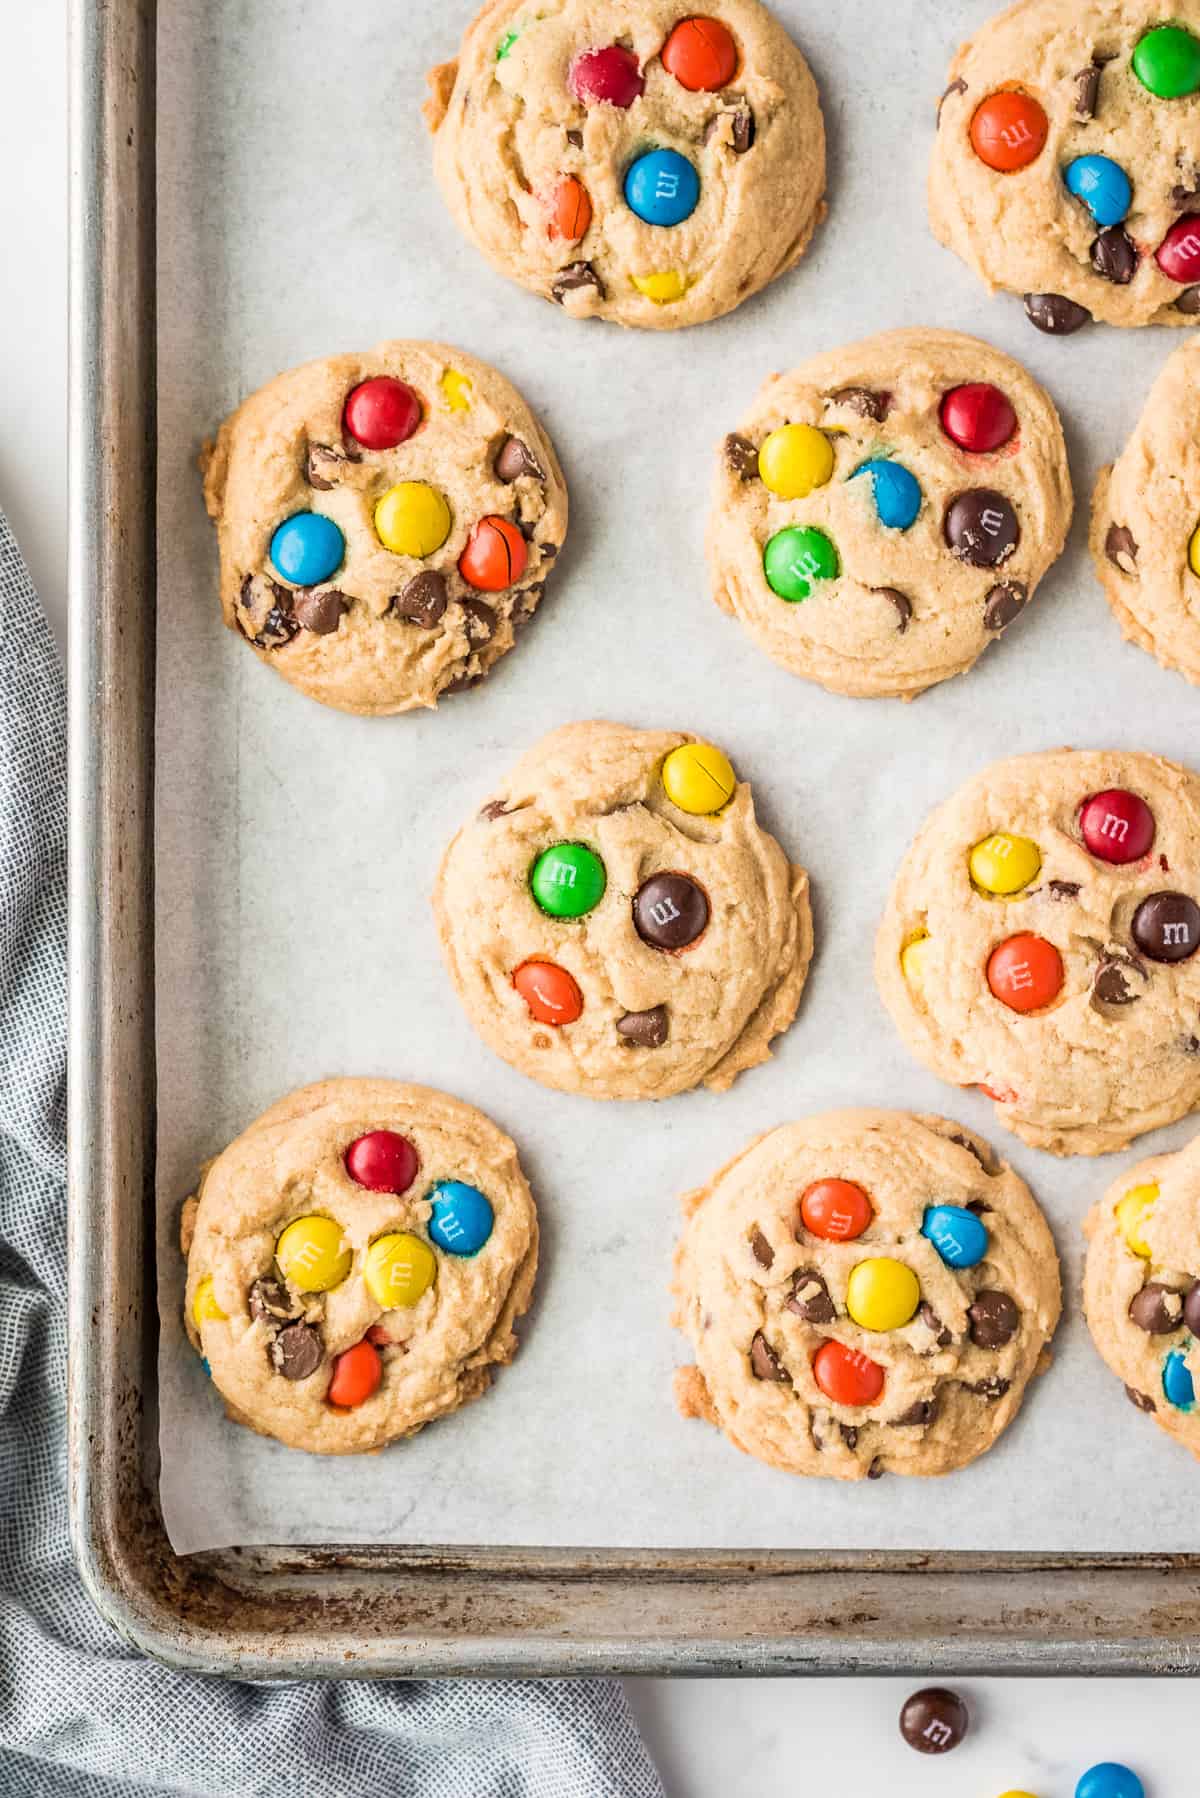 Overhead Image of baked M&M cookies on baking sheet